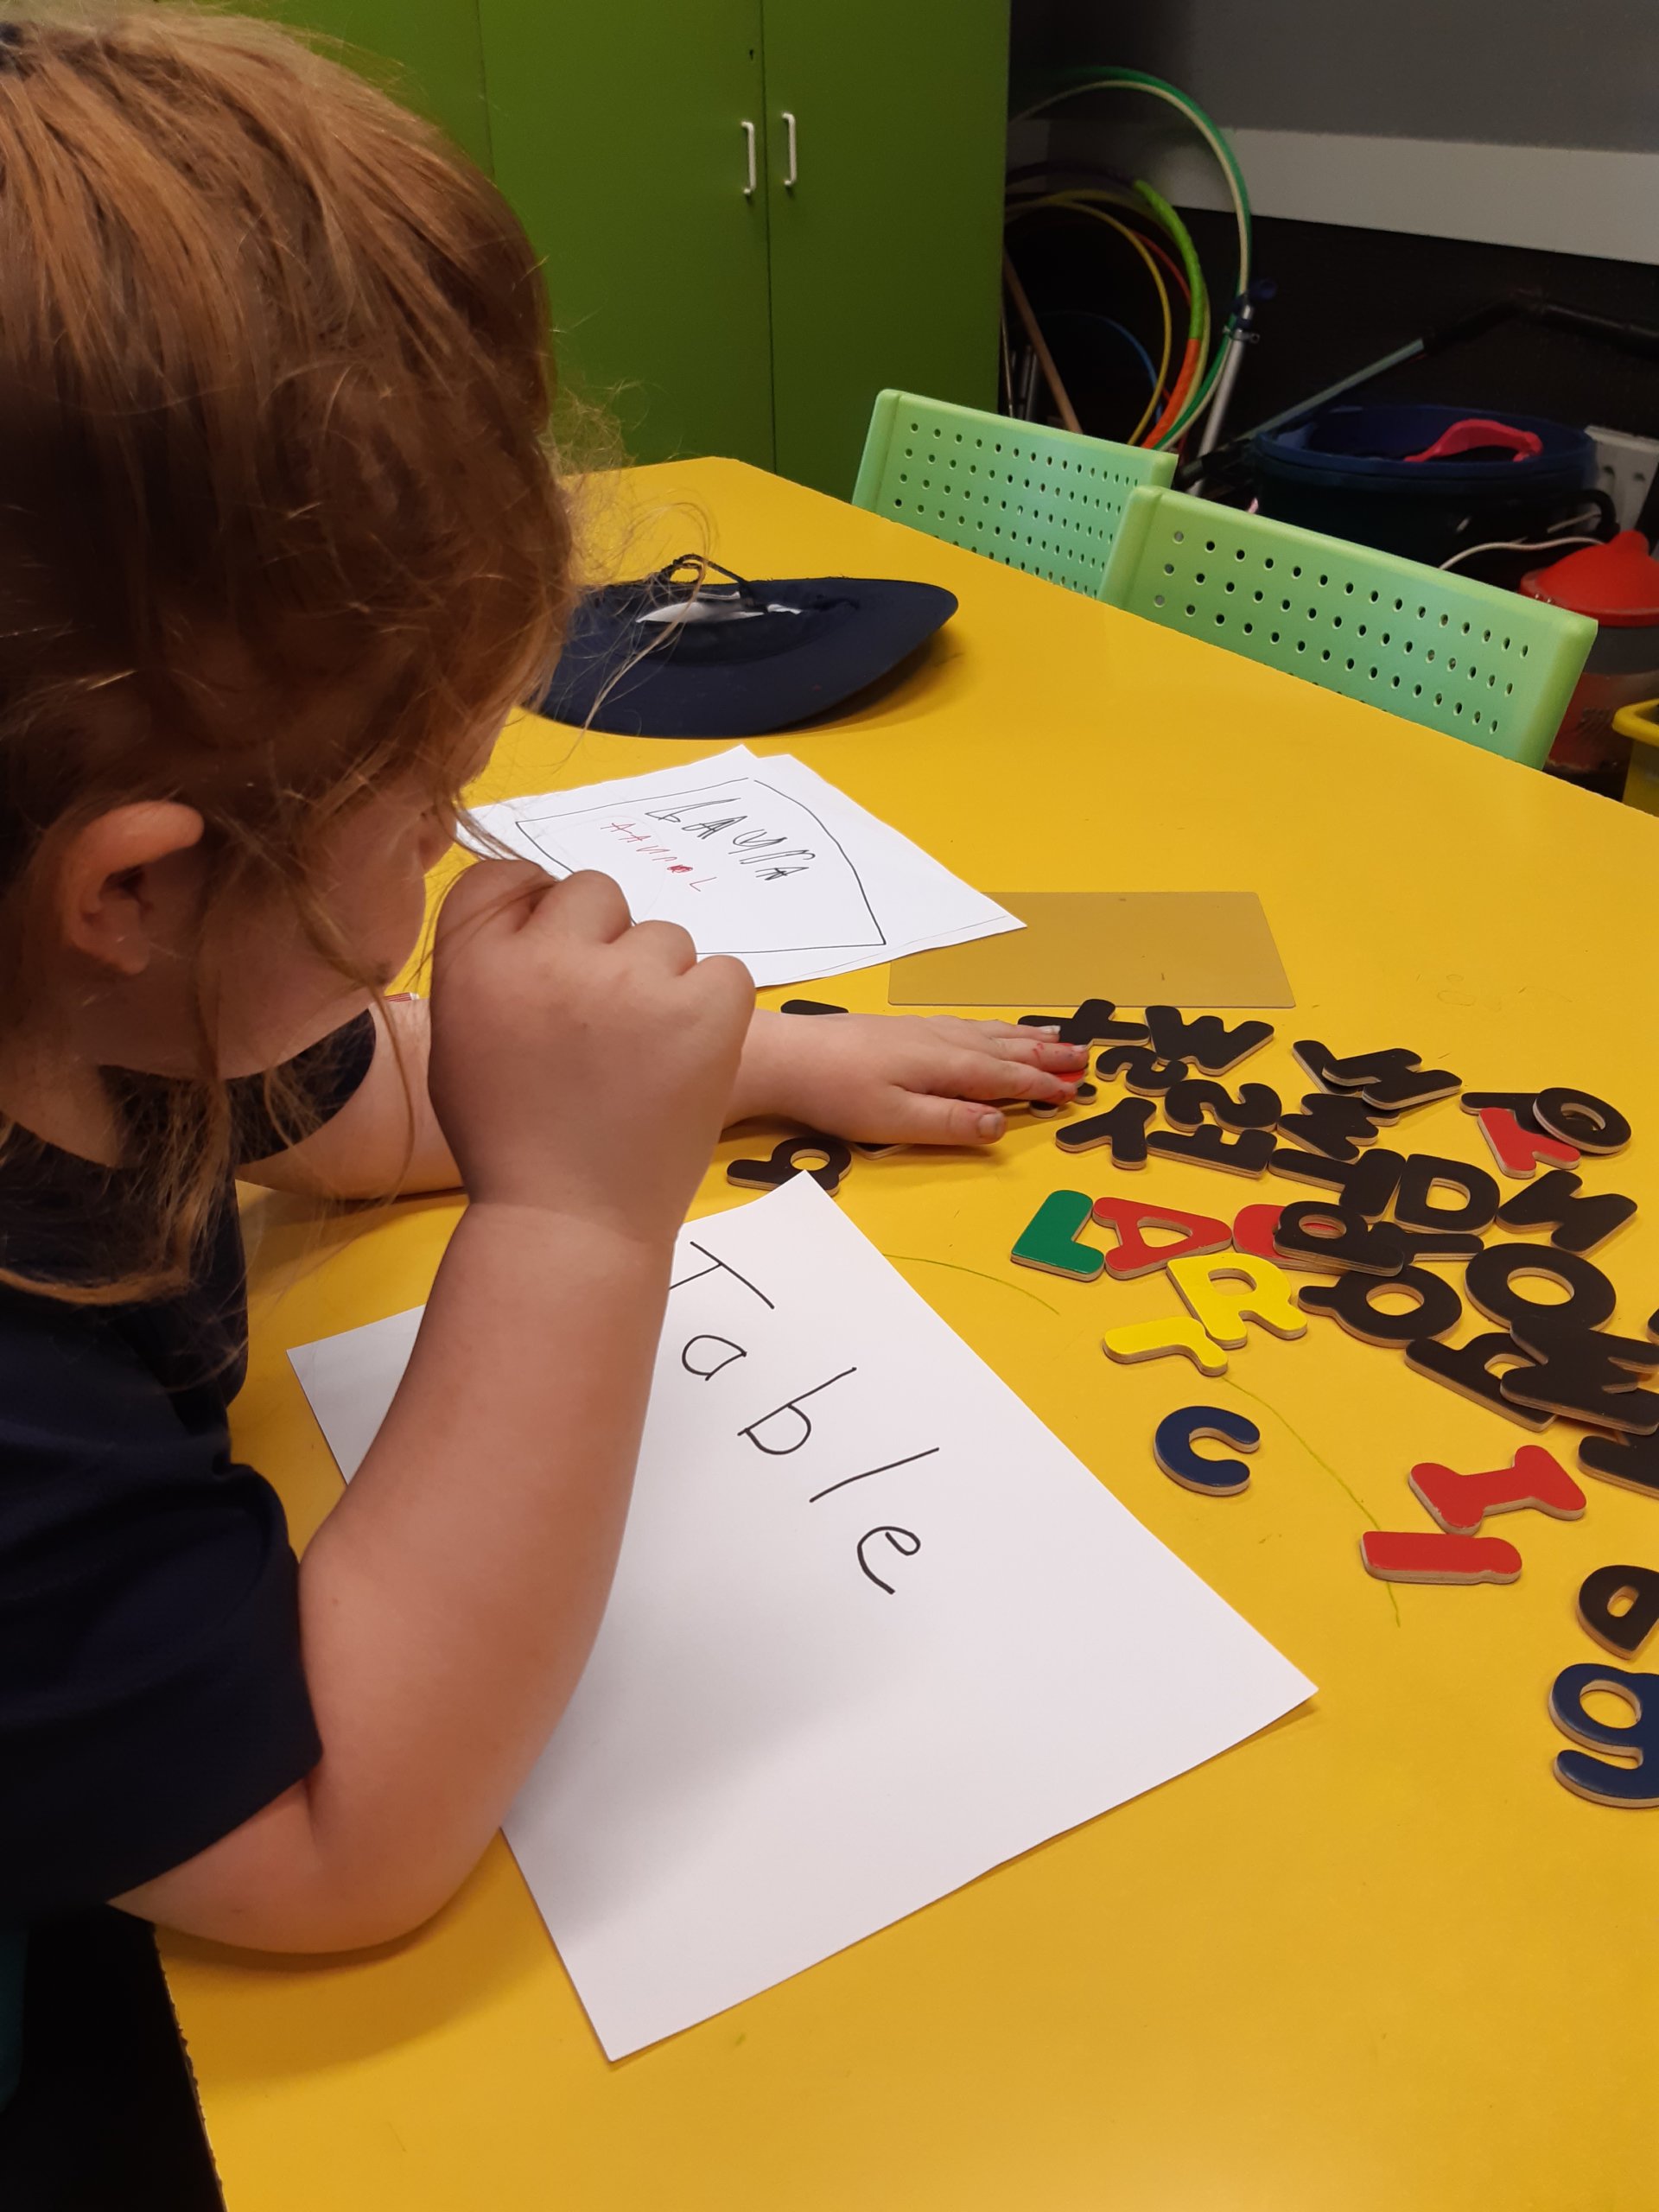 Child is sitting at a table looking at some wooden letters to match to a word on a piece of paper